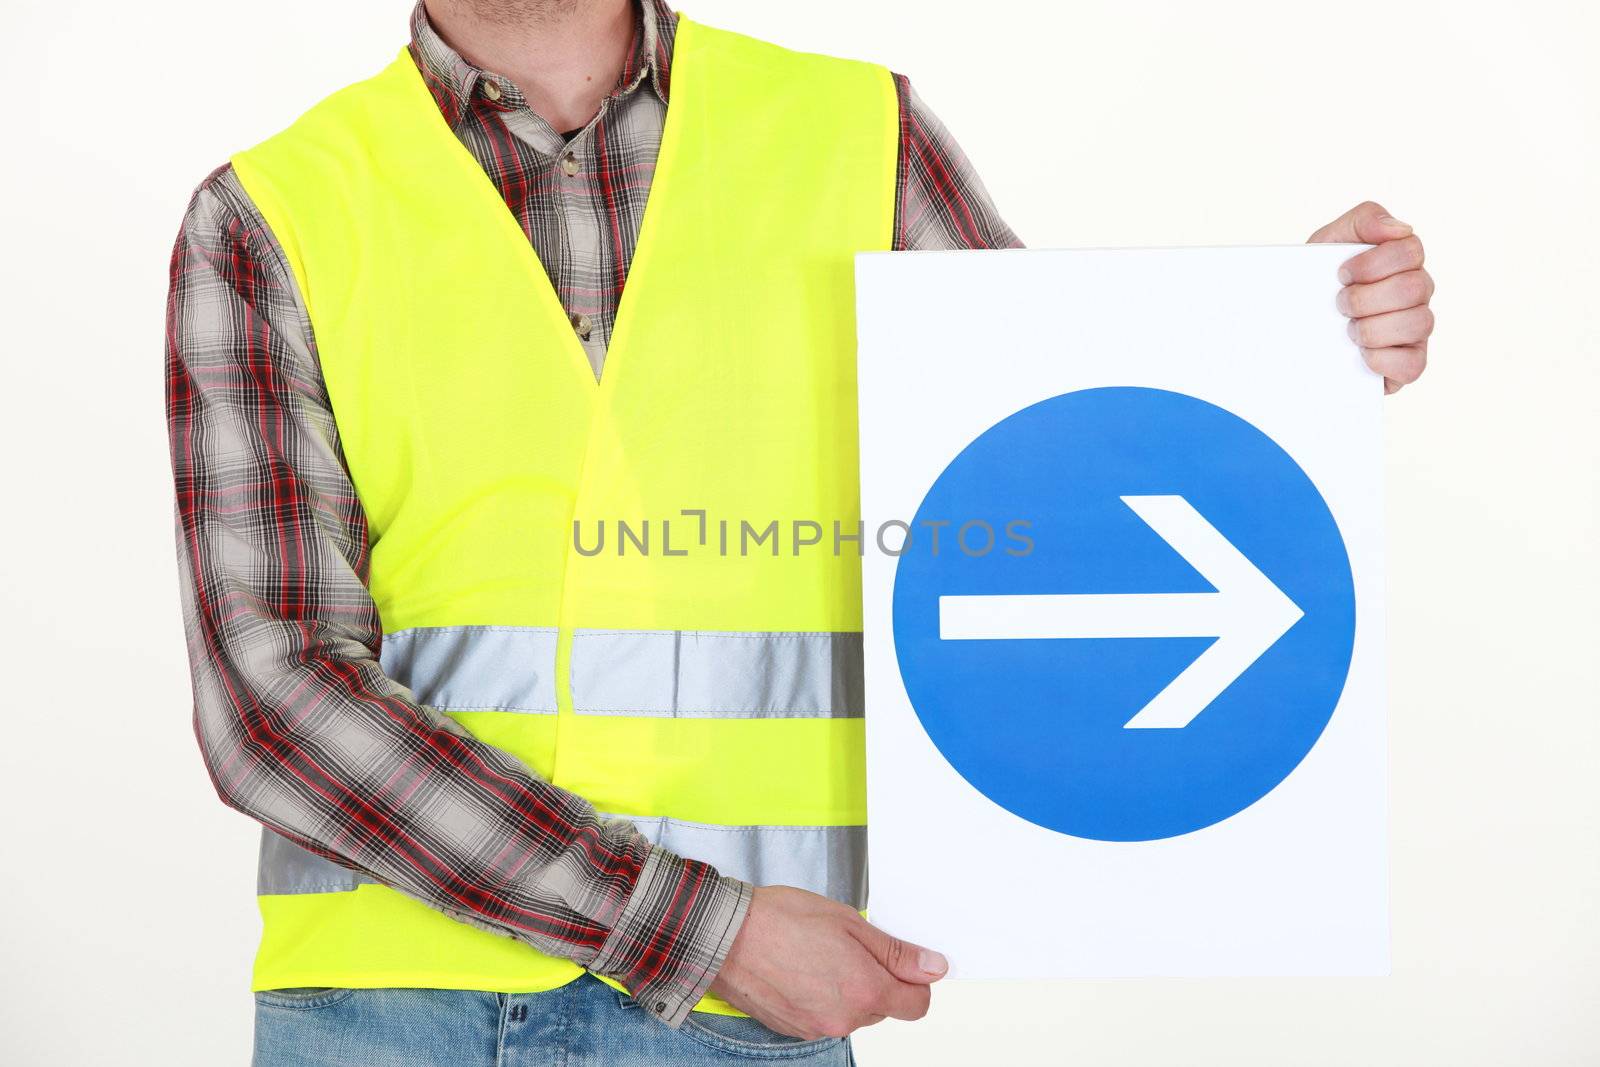 Man holding road sign